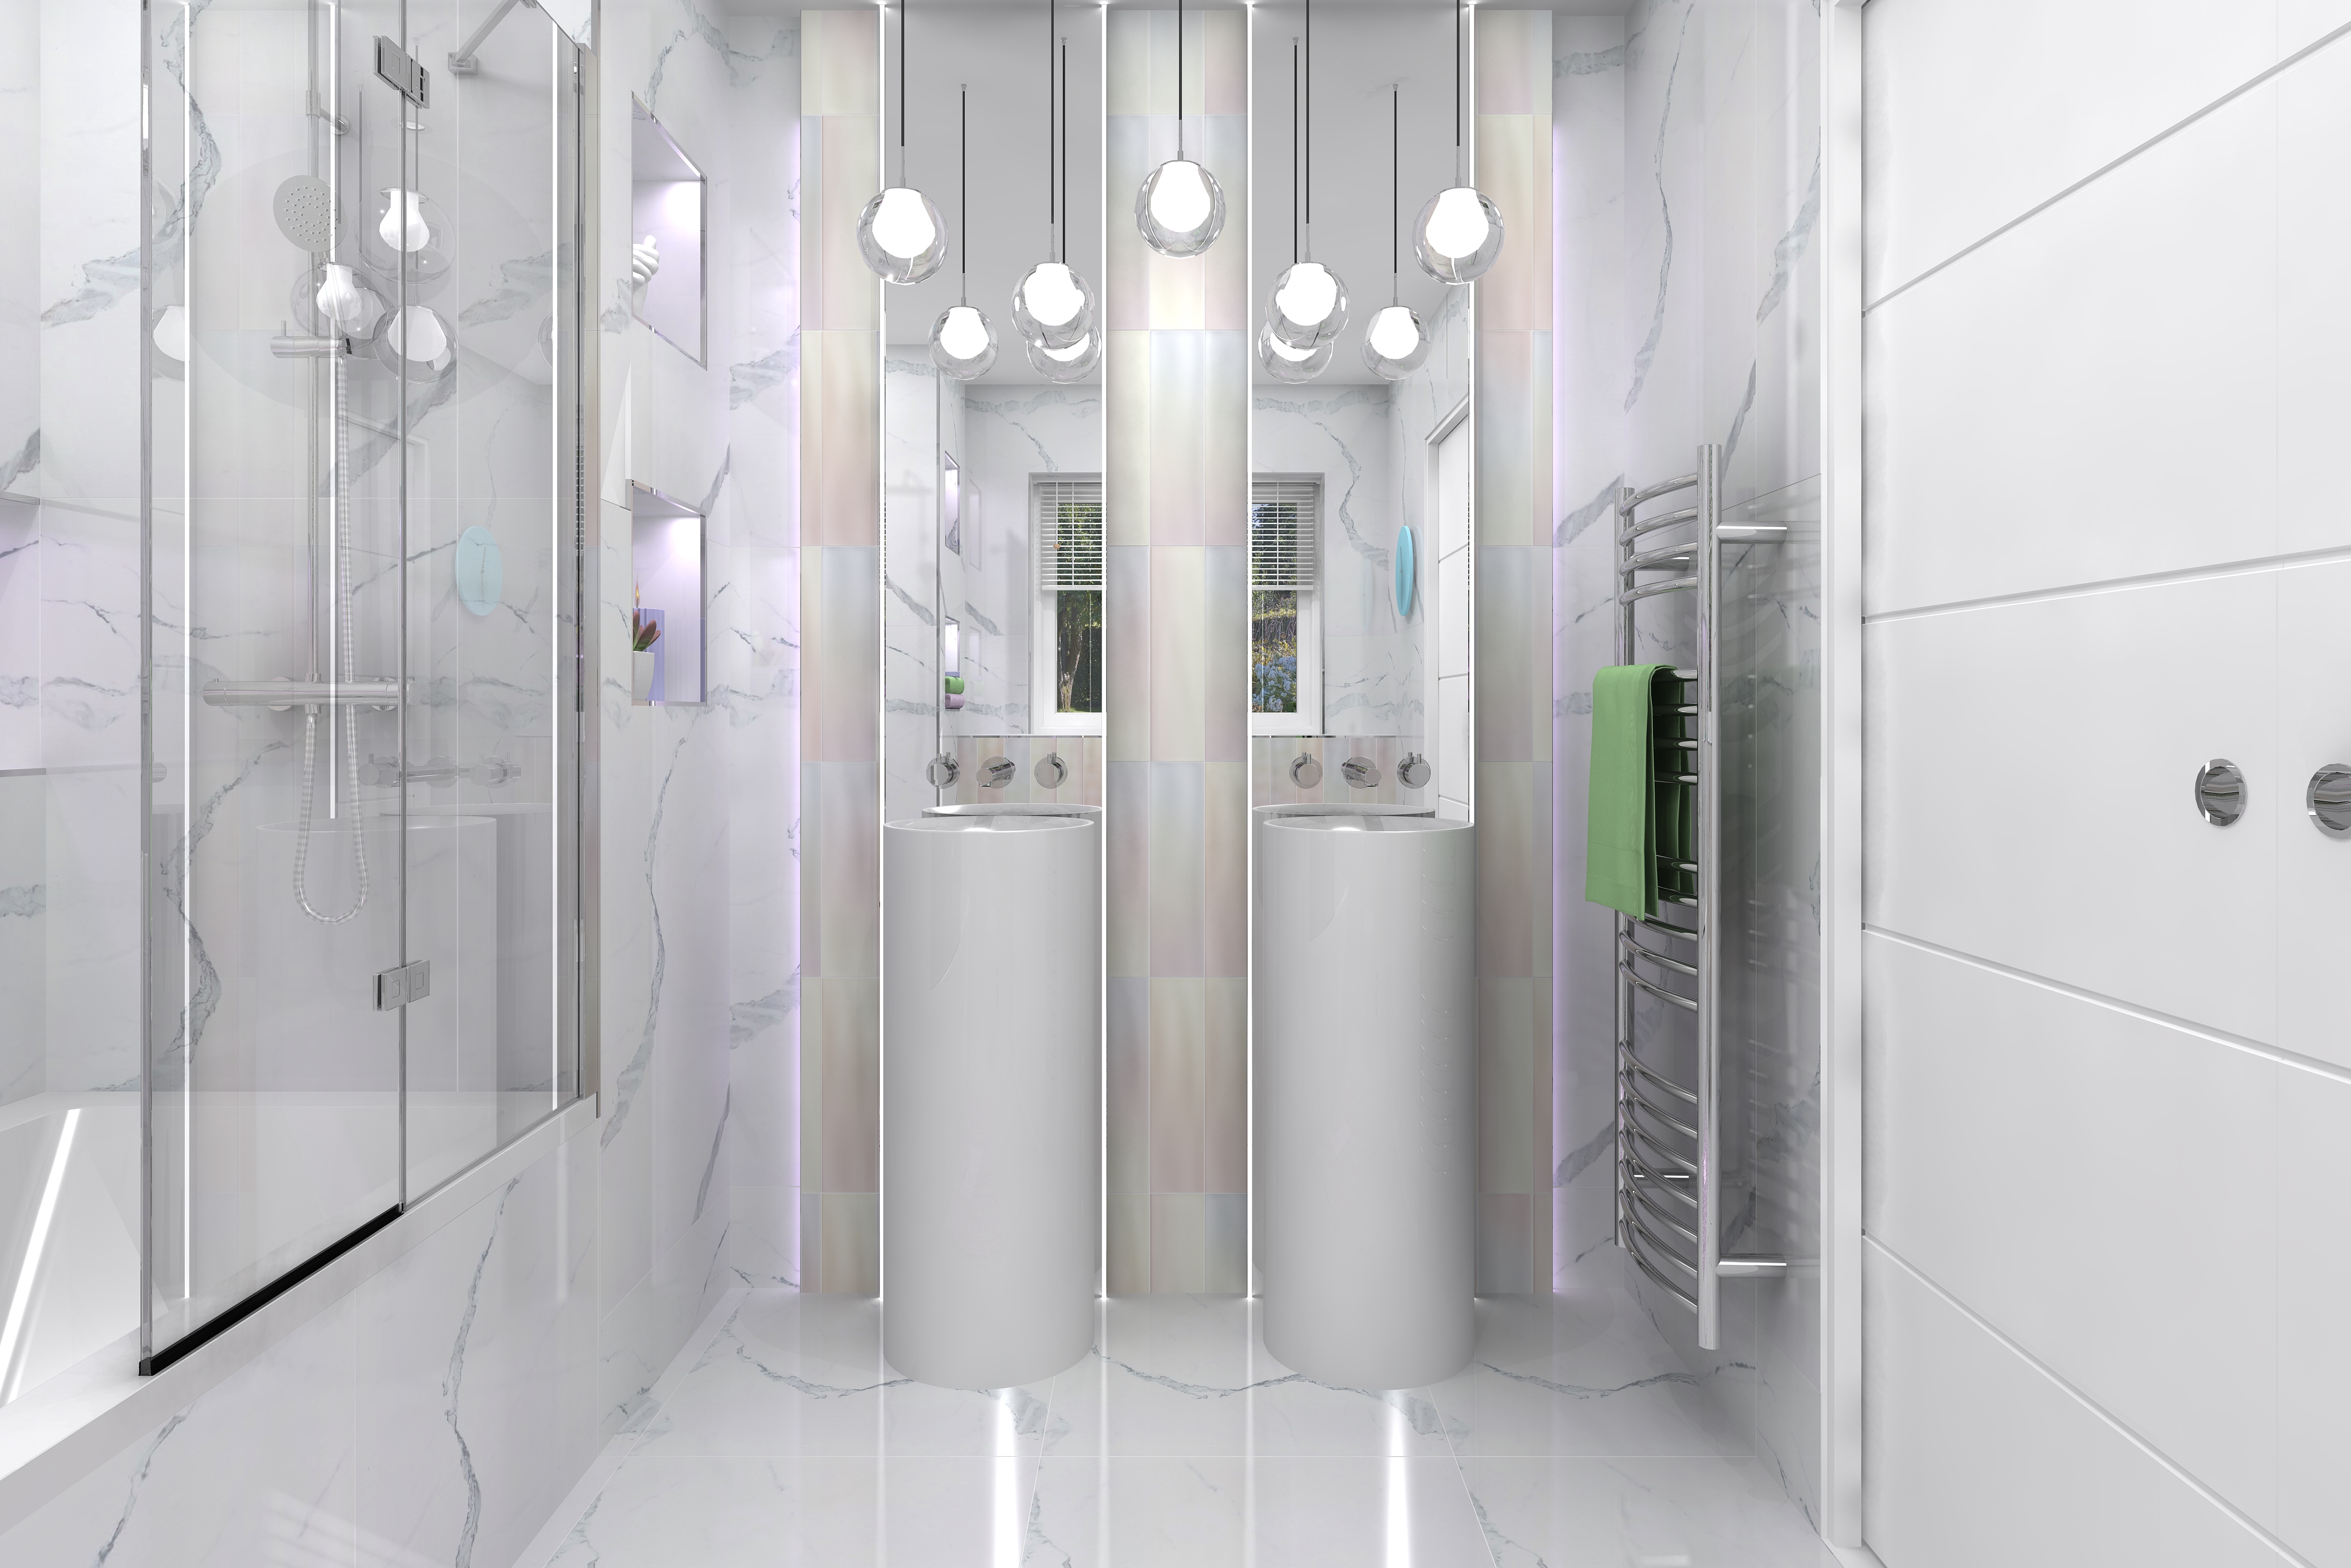 Digital lifestyle image of the Gemini inspired bathroom, with a rounded chrome radiator, twin floorstanding basins paired with chrome wall mounted basin taps, floor to celing mirrors and ceiling hung oversized lightbulbs